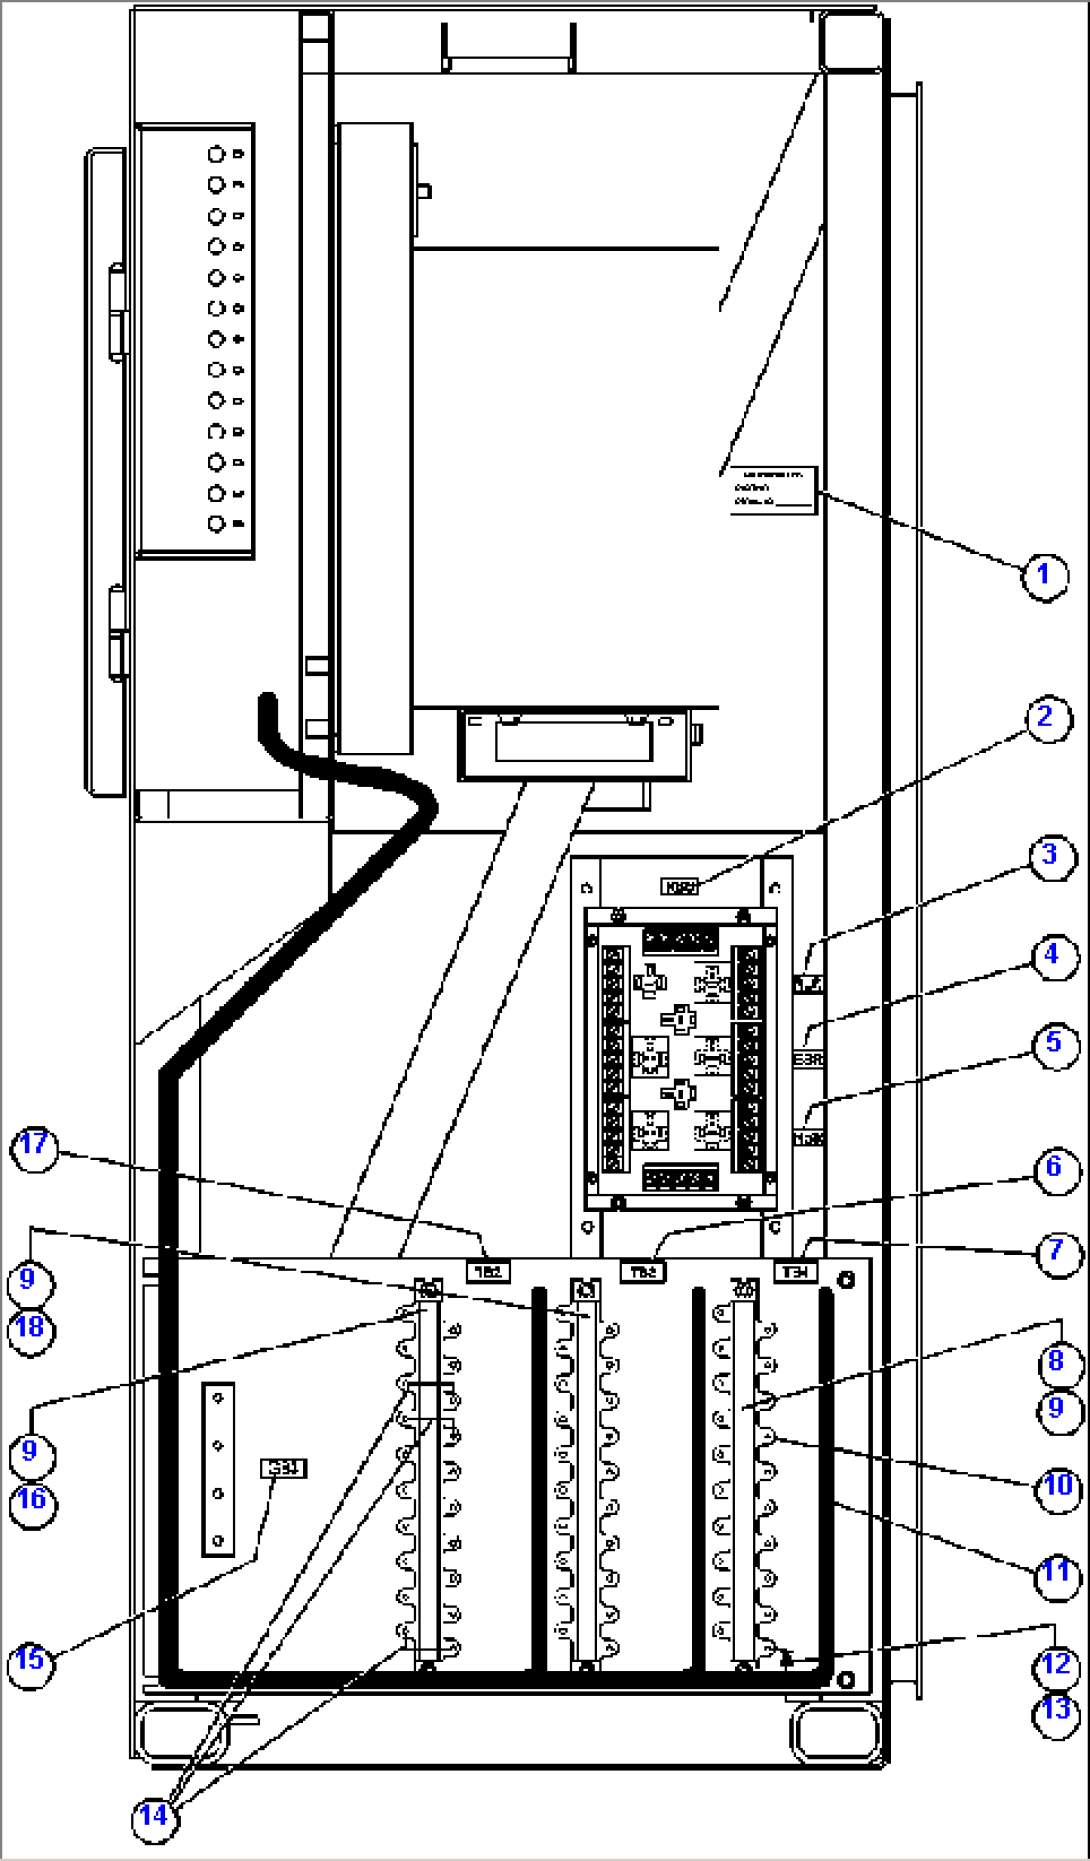 CONTROL CABINET WIRING - 4